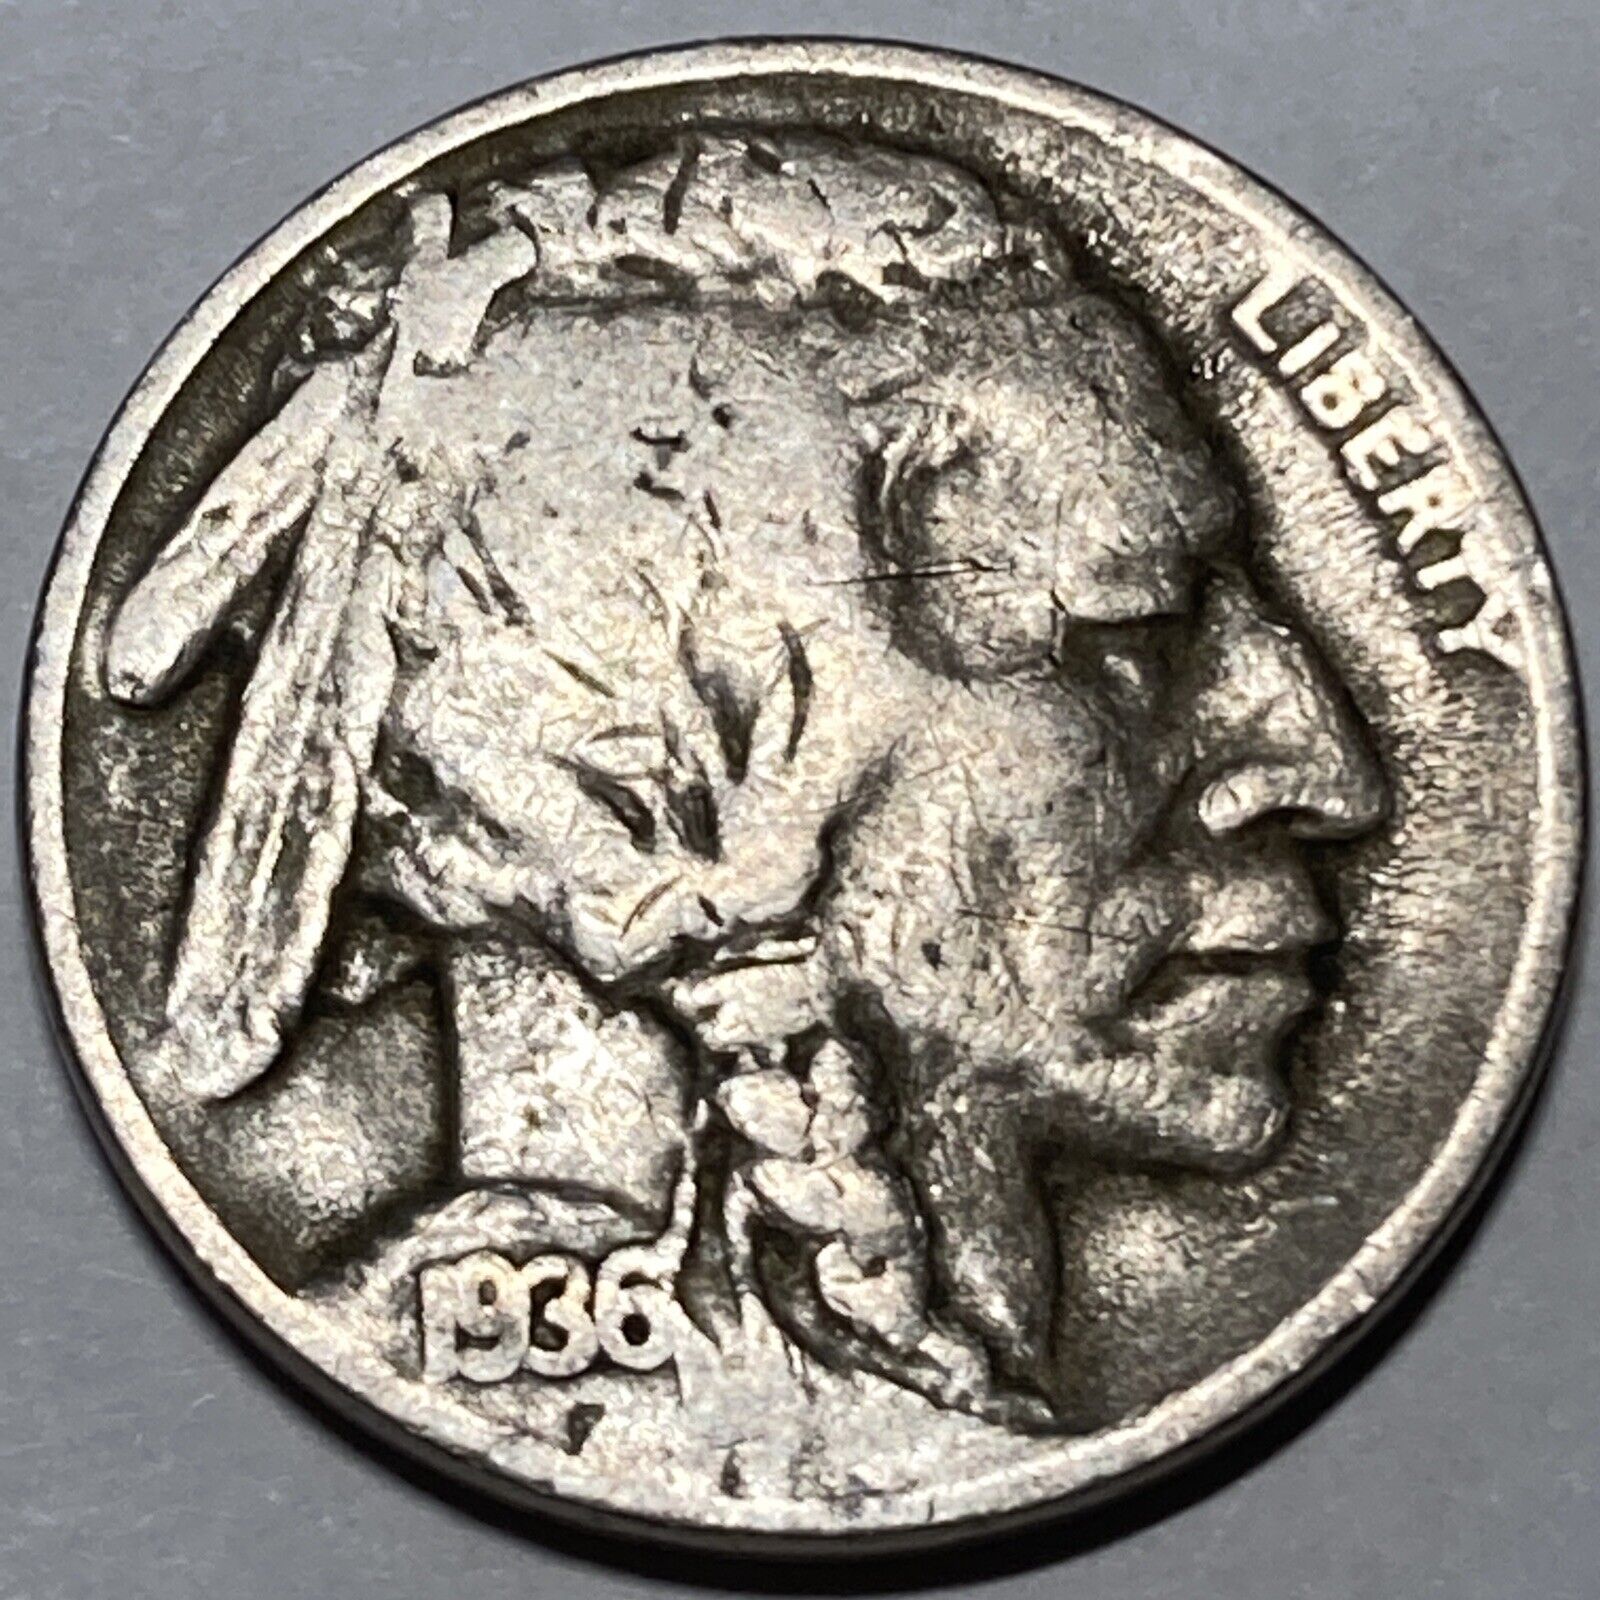 1936-D Buffalo Nickel Denver Mint Coin - Exact Coin Pictured - U